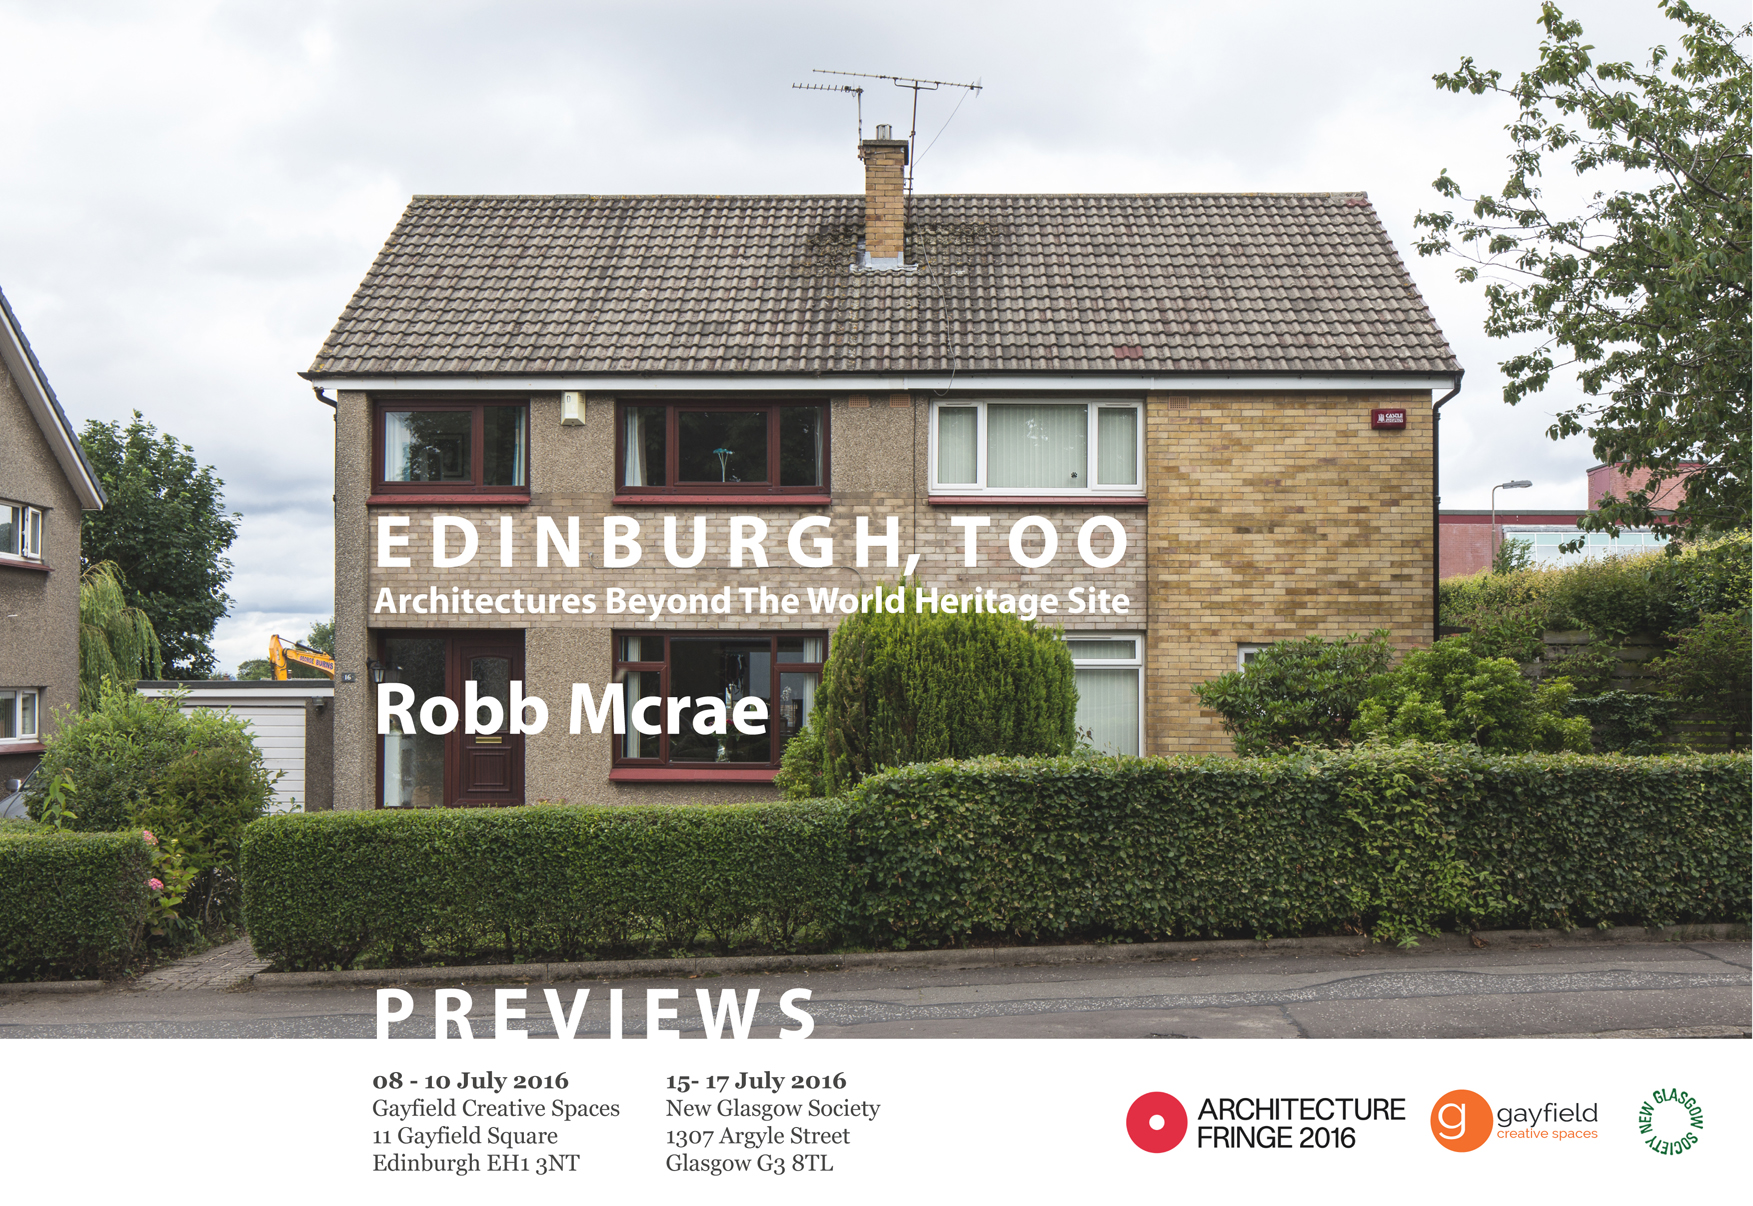 Previews of Edinburgh, Too as part of the inaugural Architecture Fringe